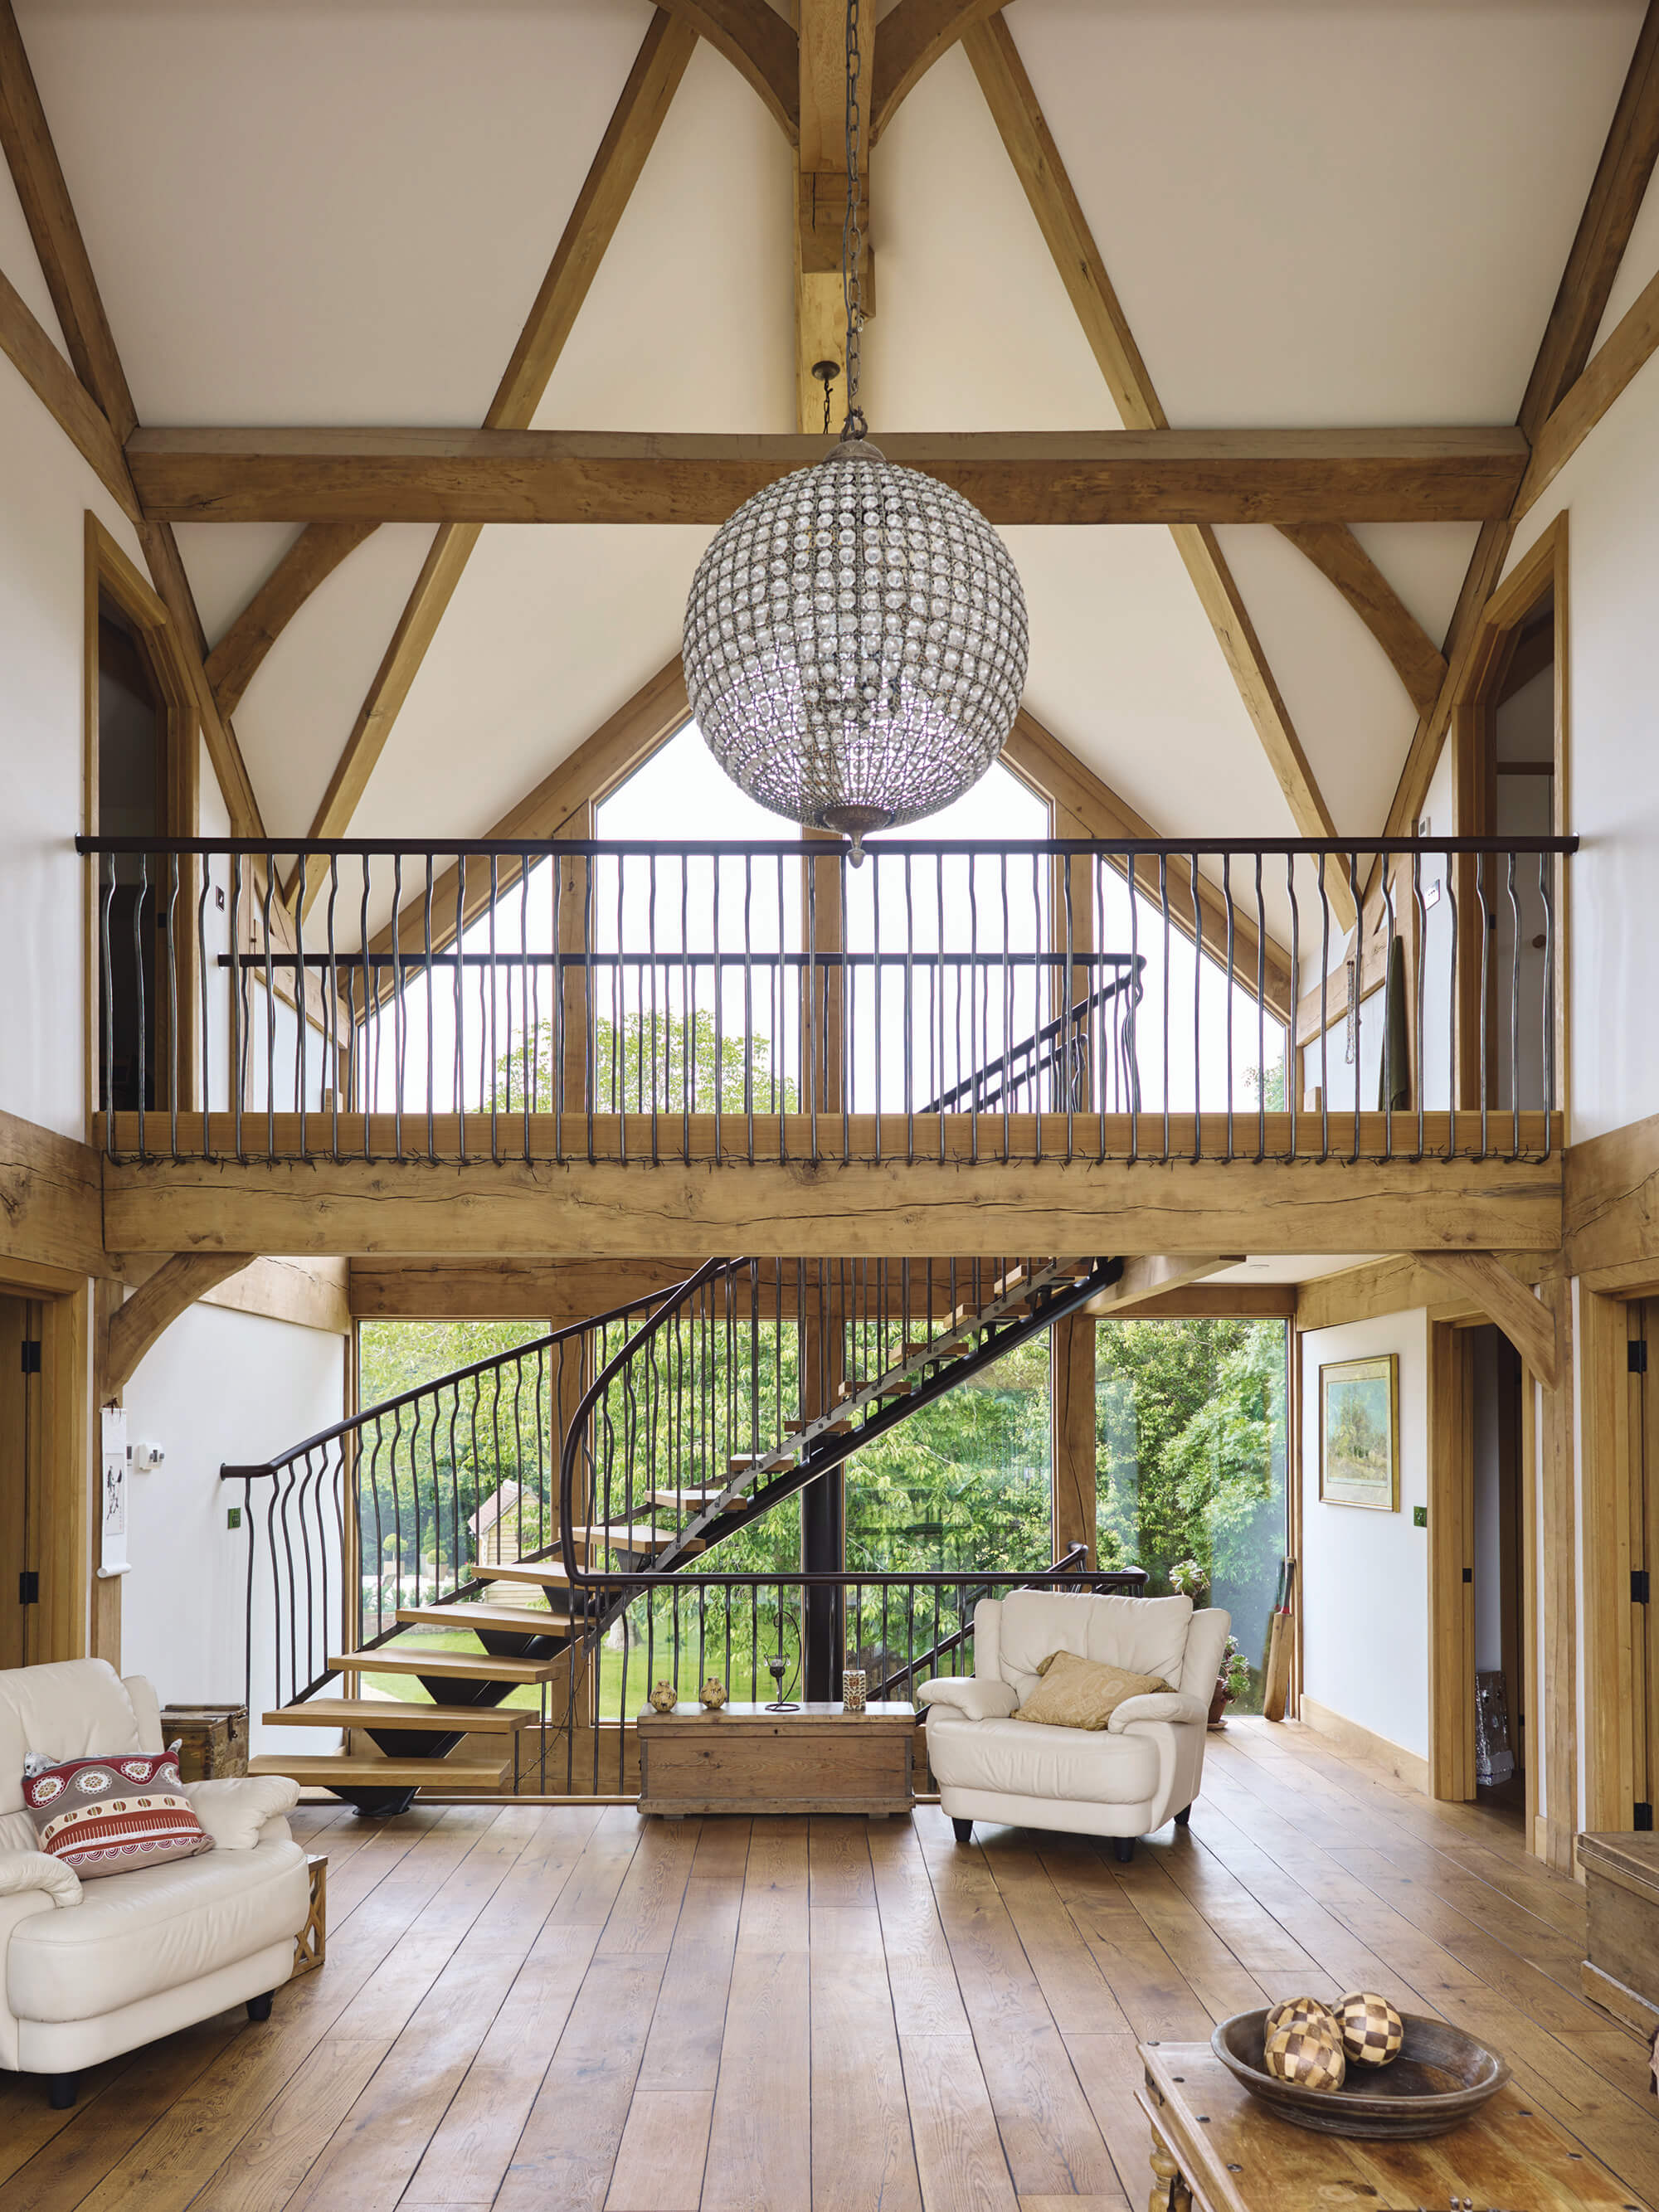 Timber & Flint-Clad Oak Frame Home with Rustic Interior